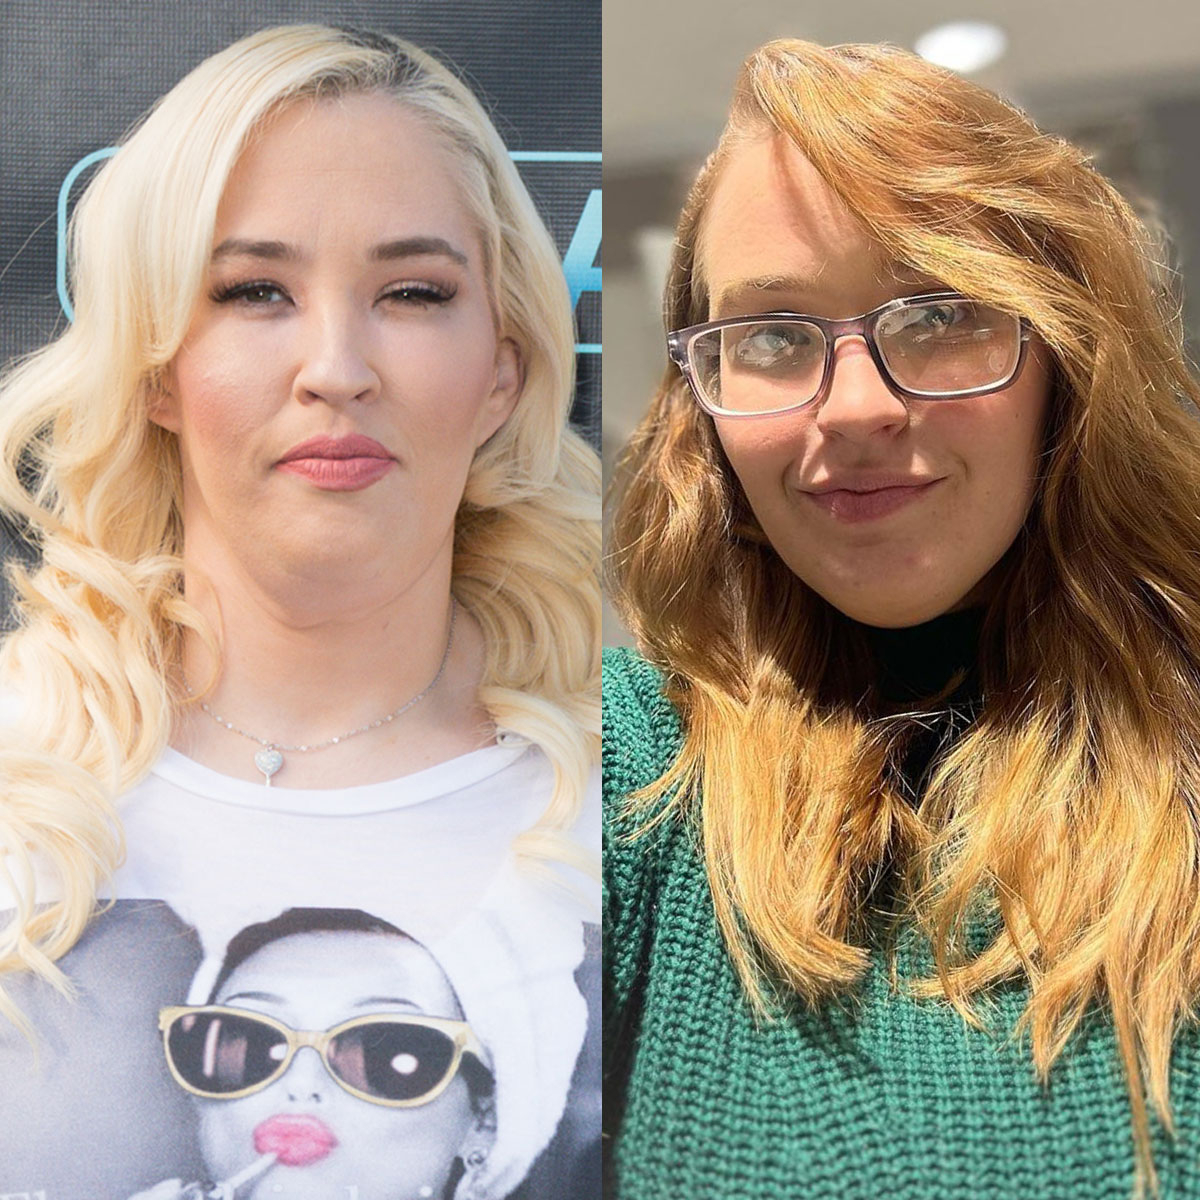 Mama June Shannon Gives Update on Anna “Chickadee” Cardwell’s Cancer